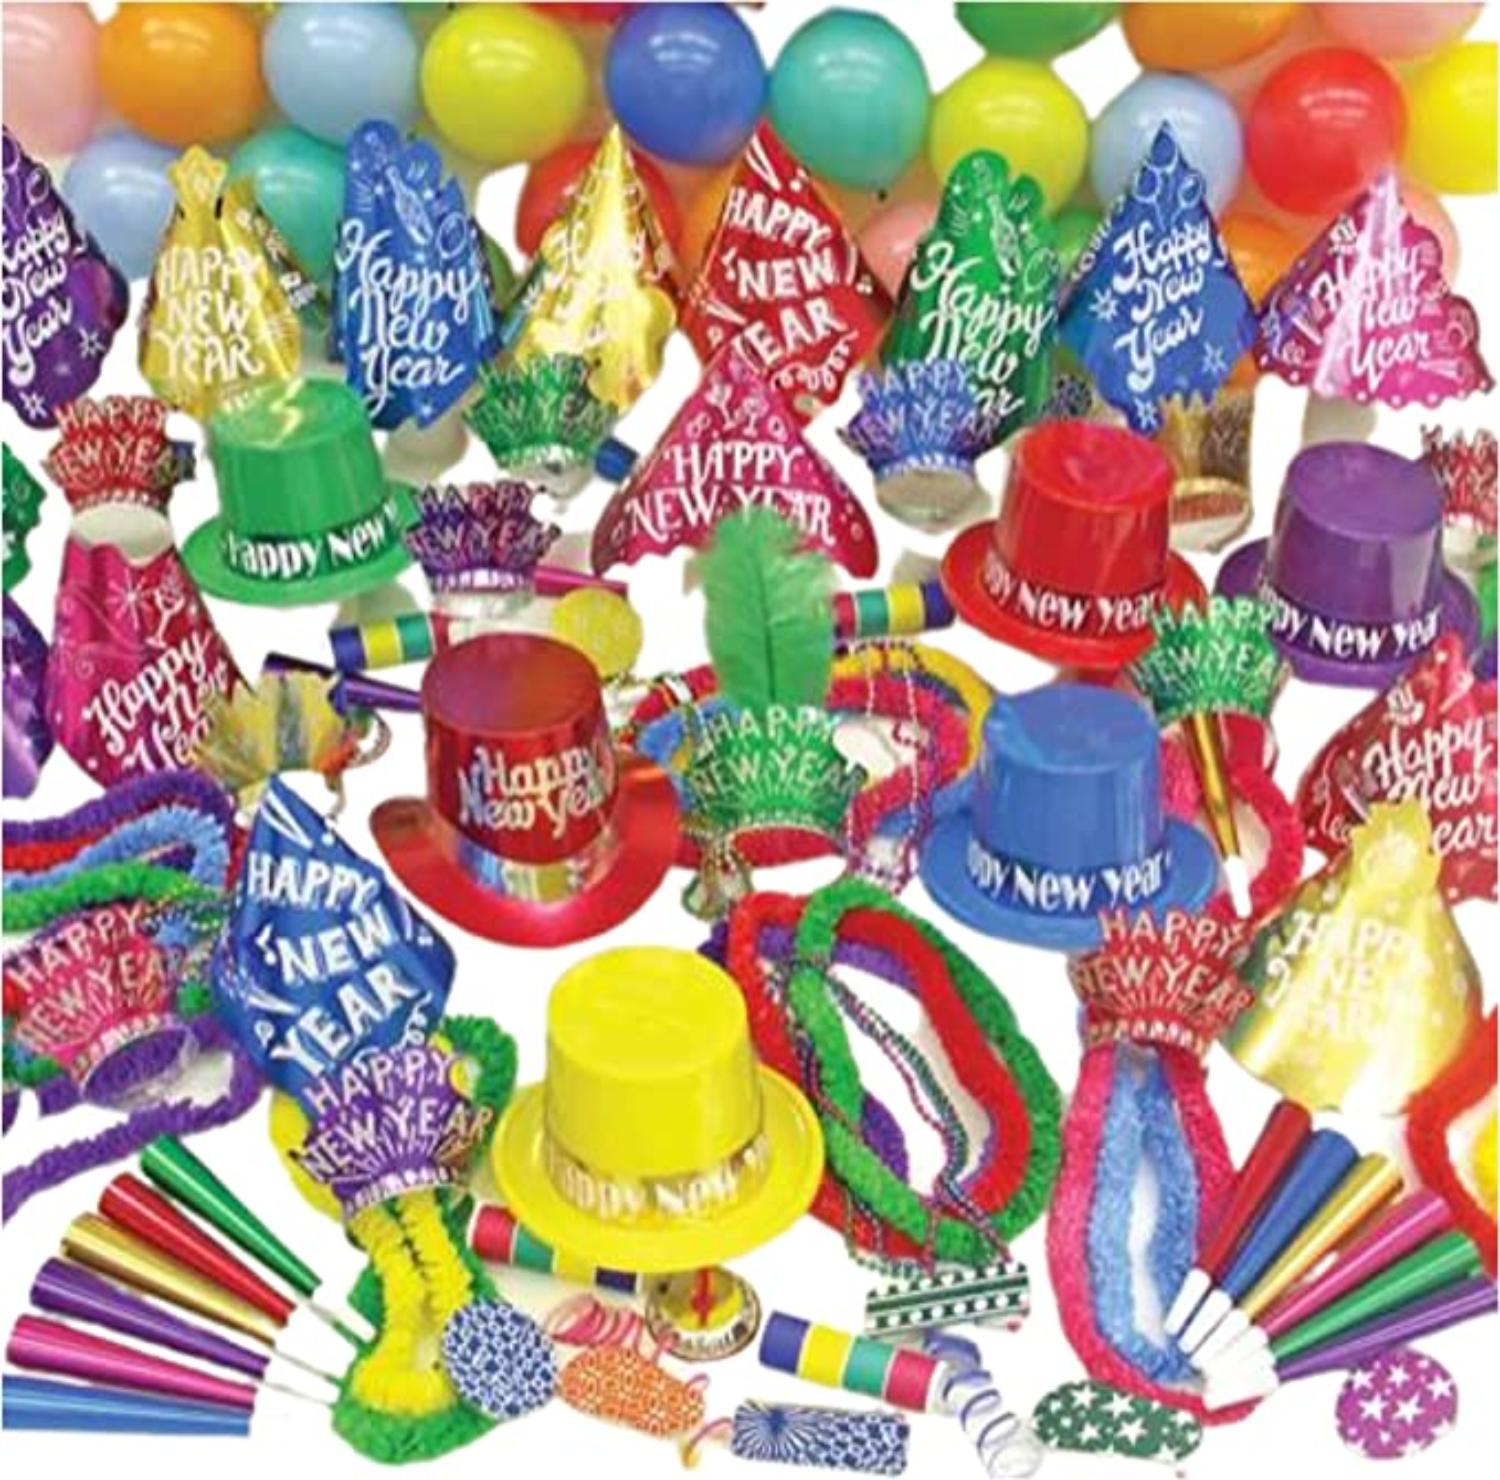 Vibrant Sensation Party Kit for 100 New Years